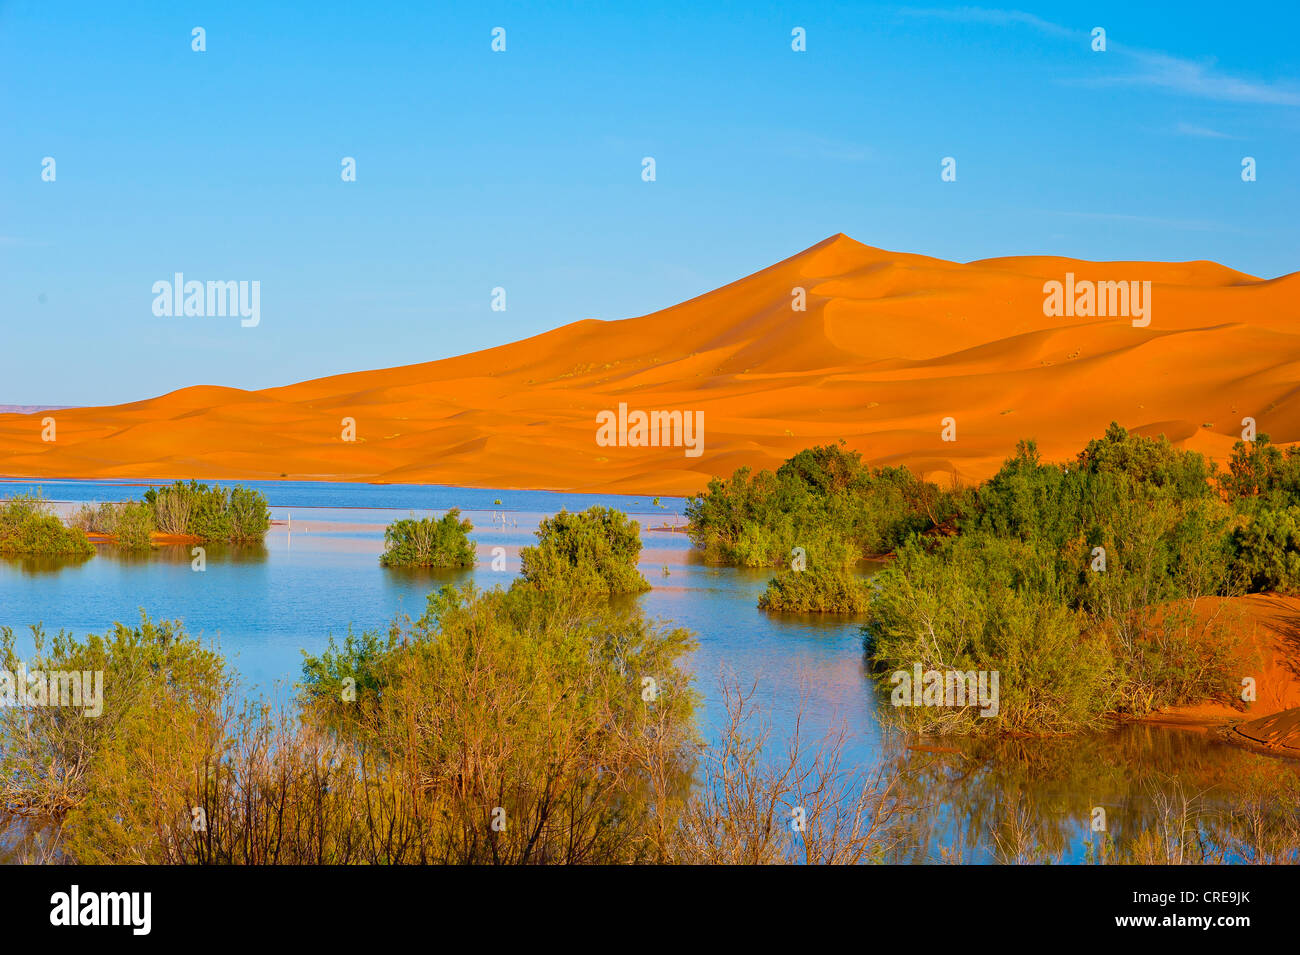 Erg Chebbi sand dunes behind a temporal lake formed after heavy rains with tamarisks (Tamaricaceae), Sahara, southern Morocco Stock Photo